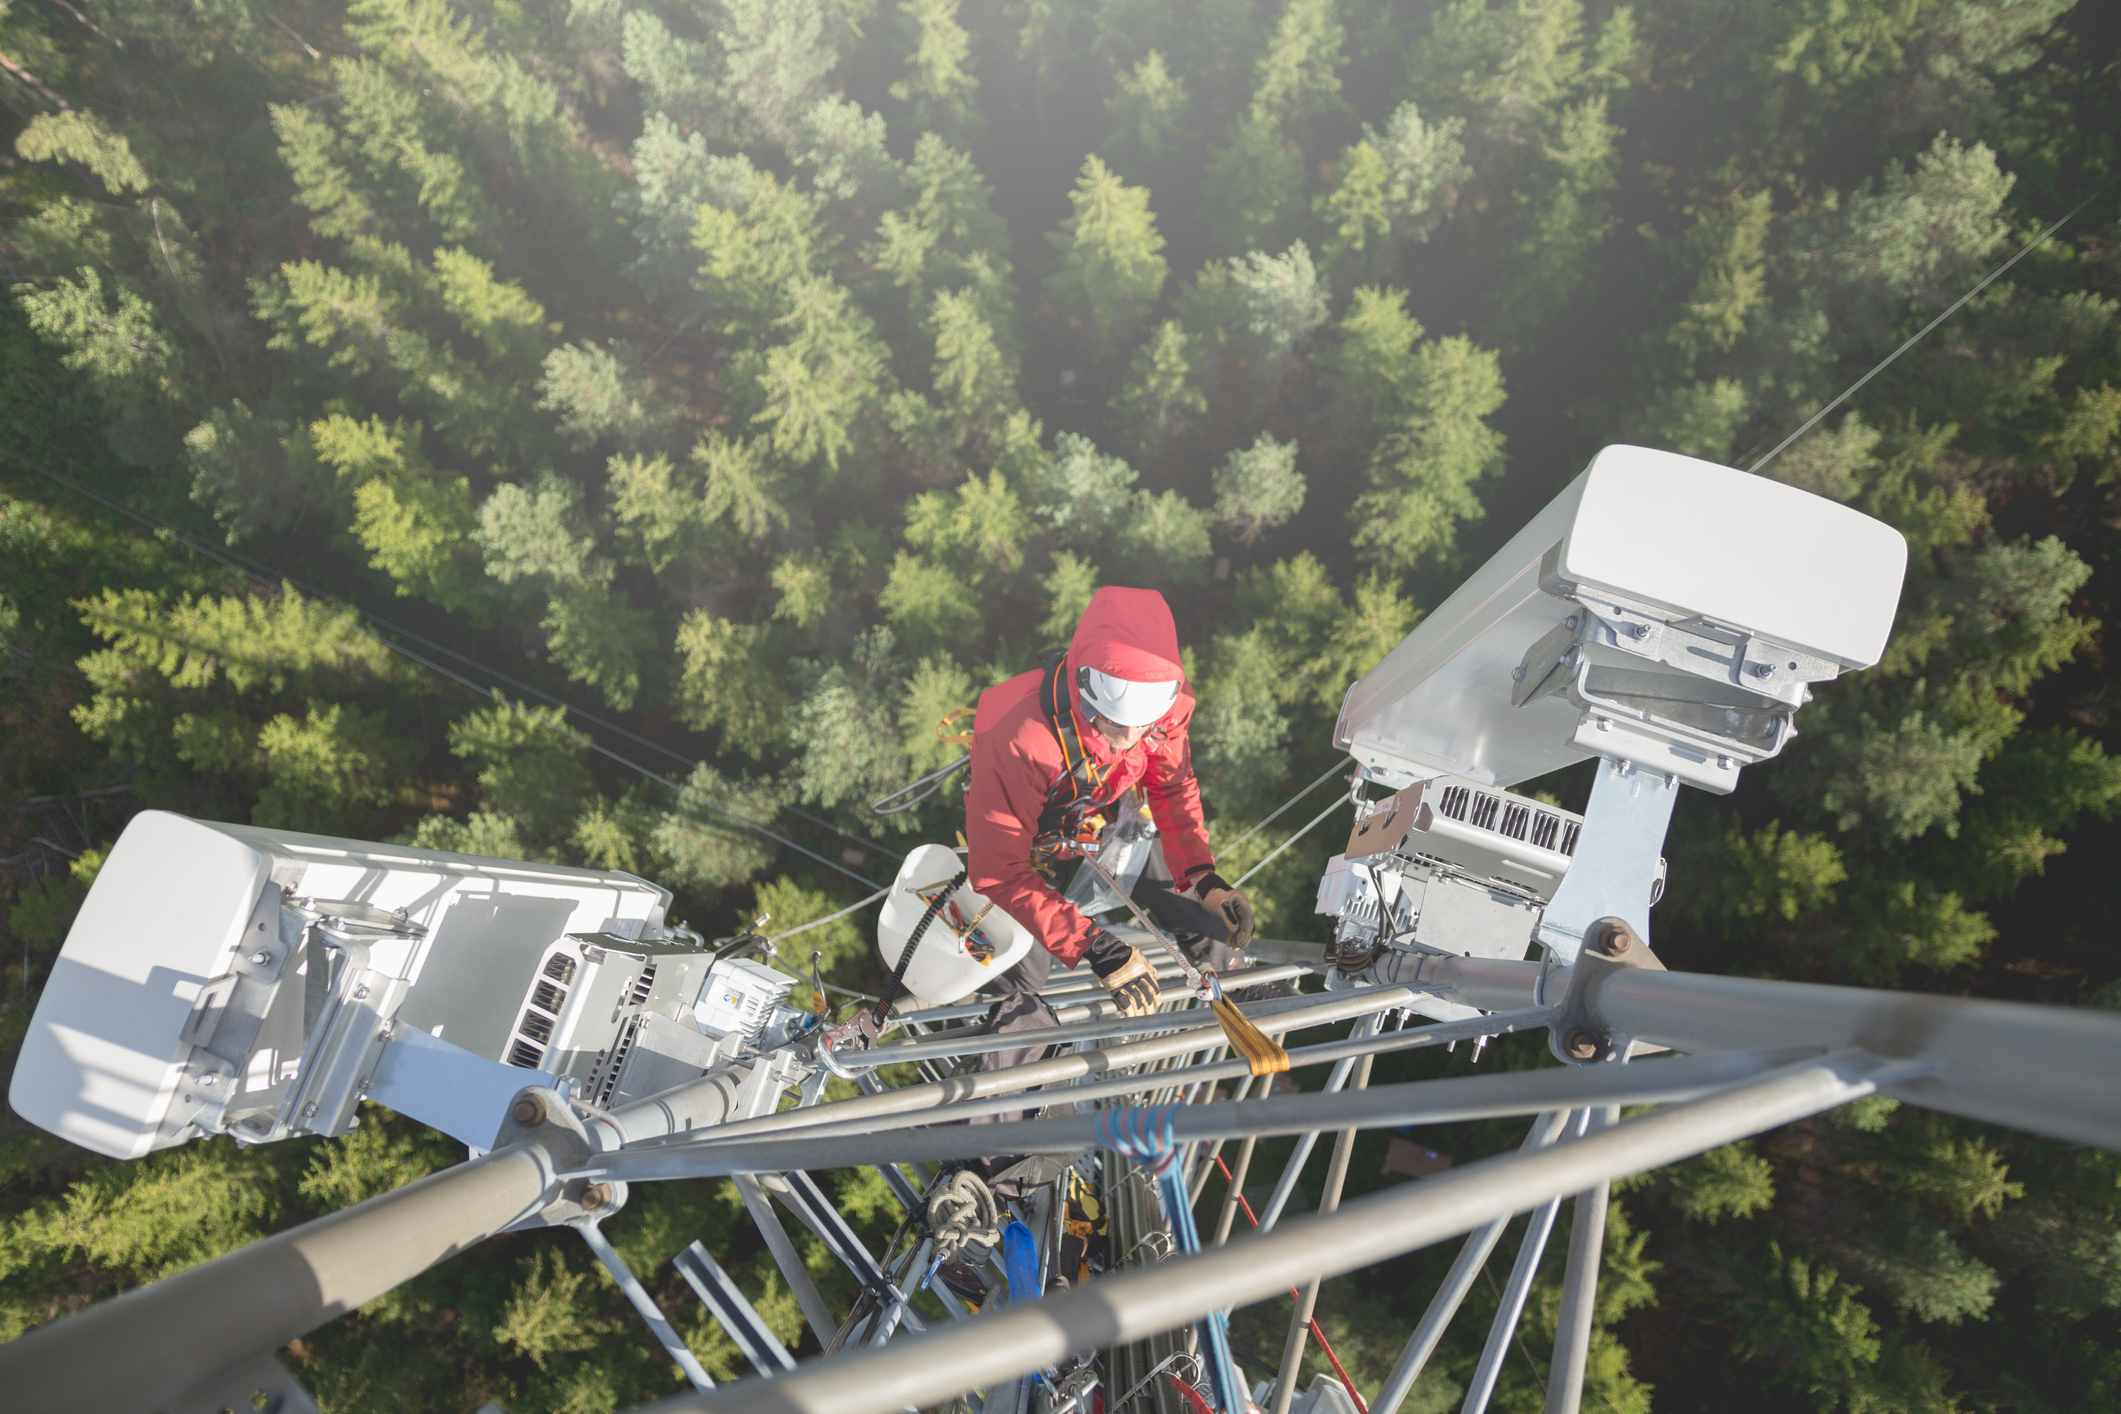 Telecommunication manual high worker engineer installing new 3g 4g LTE antenna on tall mobile base station (communication tower) in the middle of european forest, high angle of view. Working at height. Telecommunication masts and towers are typically tall structures designed to support antennas for telecommunications and broadcasting. Drone point of view.